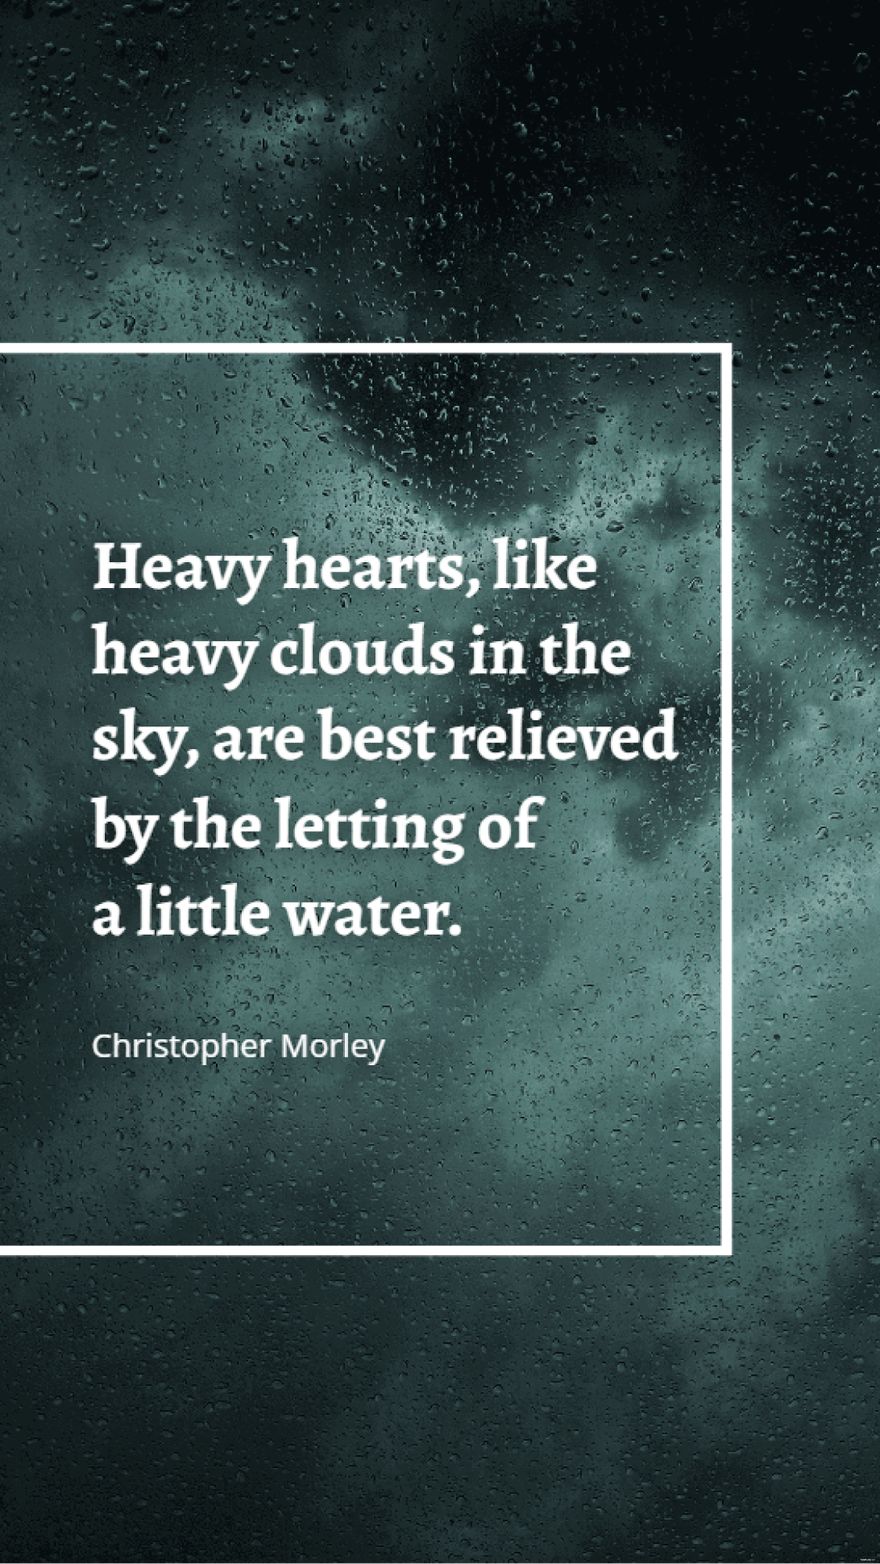 Christopher Morley - Heavy hearts, like heavy clouds in the sky, are best relieved by the letting of a little water.